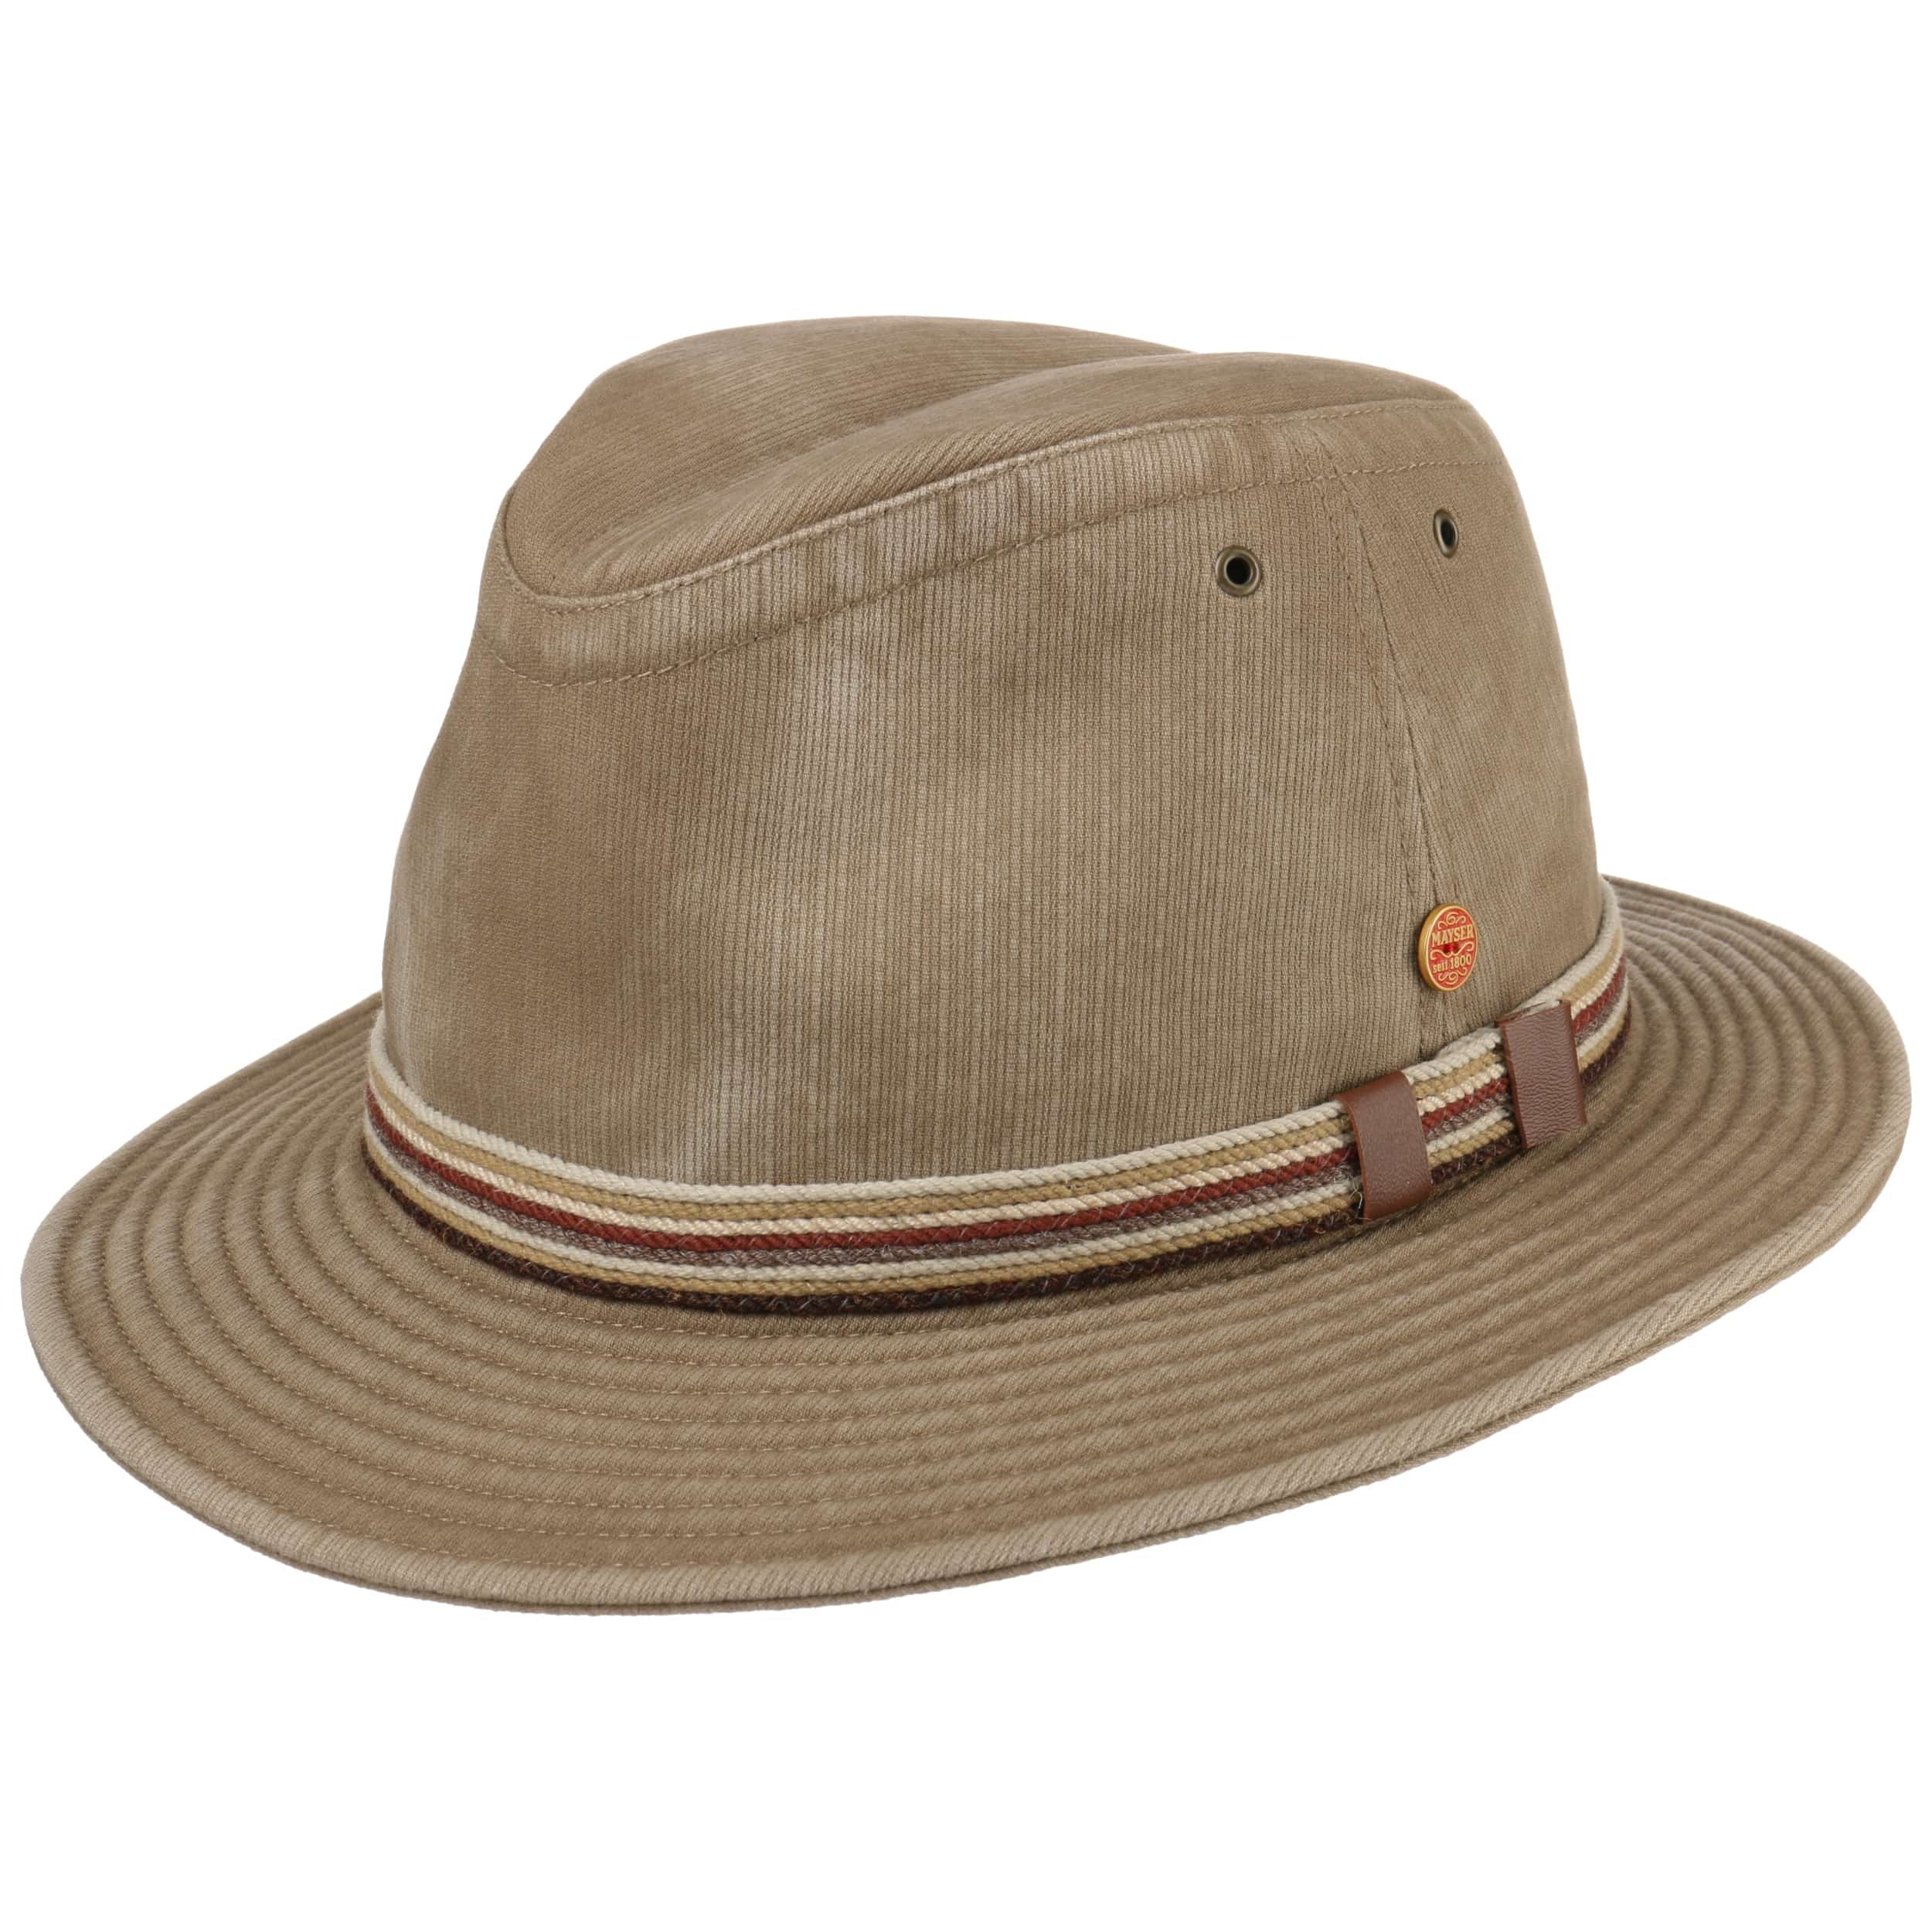 Menowin Sun Protect Outdoor Hat by Mayser - 103,95